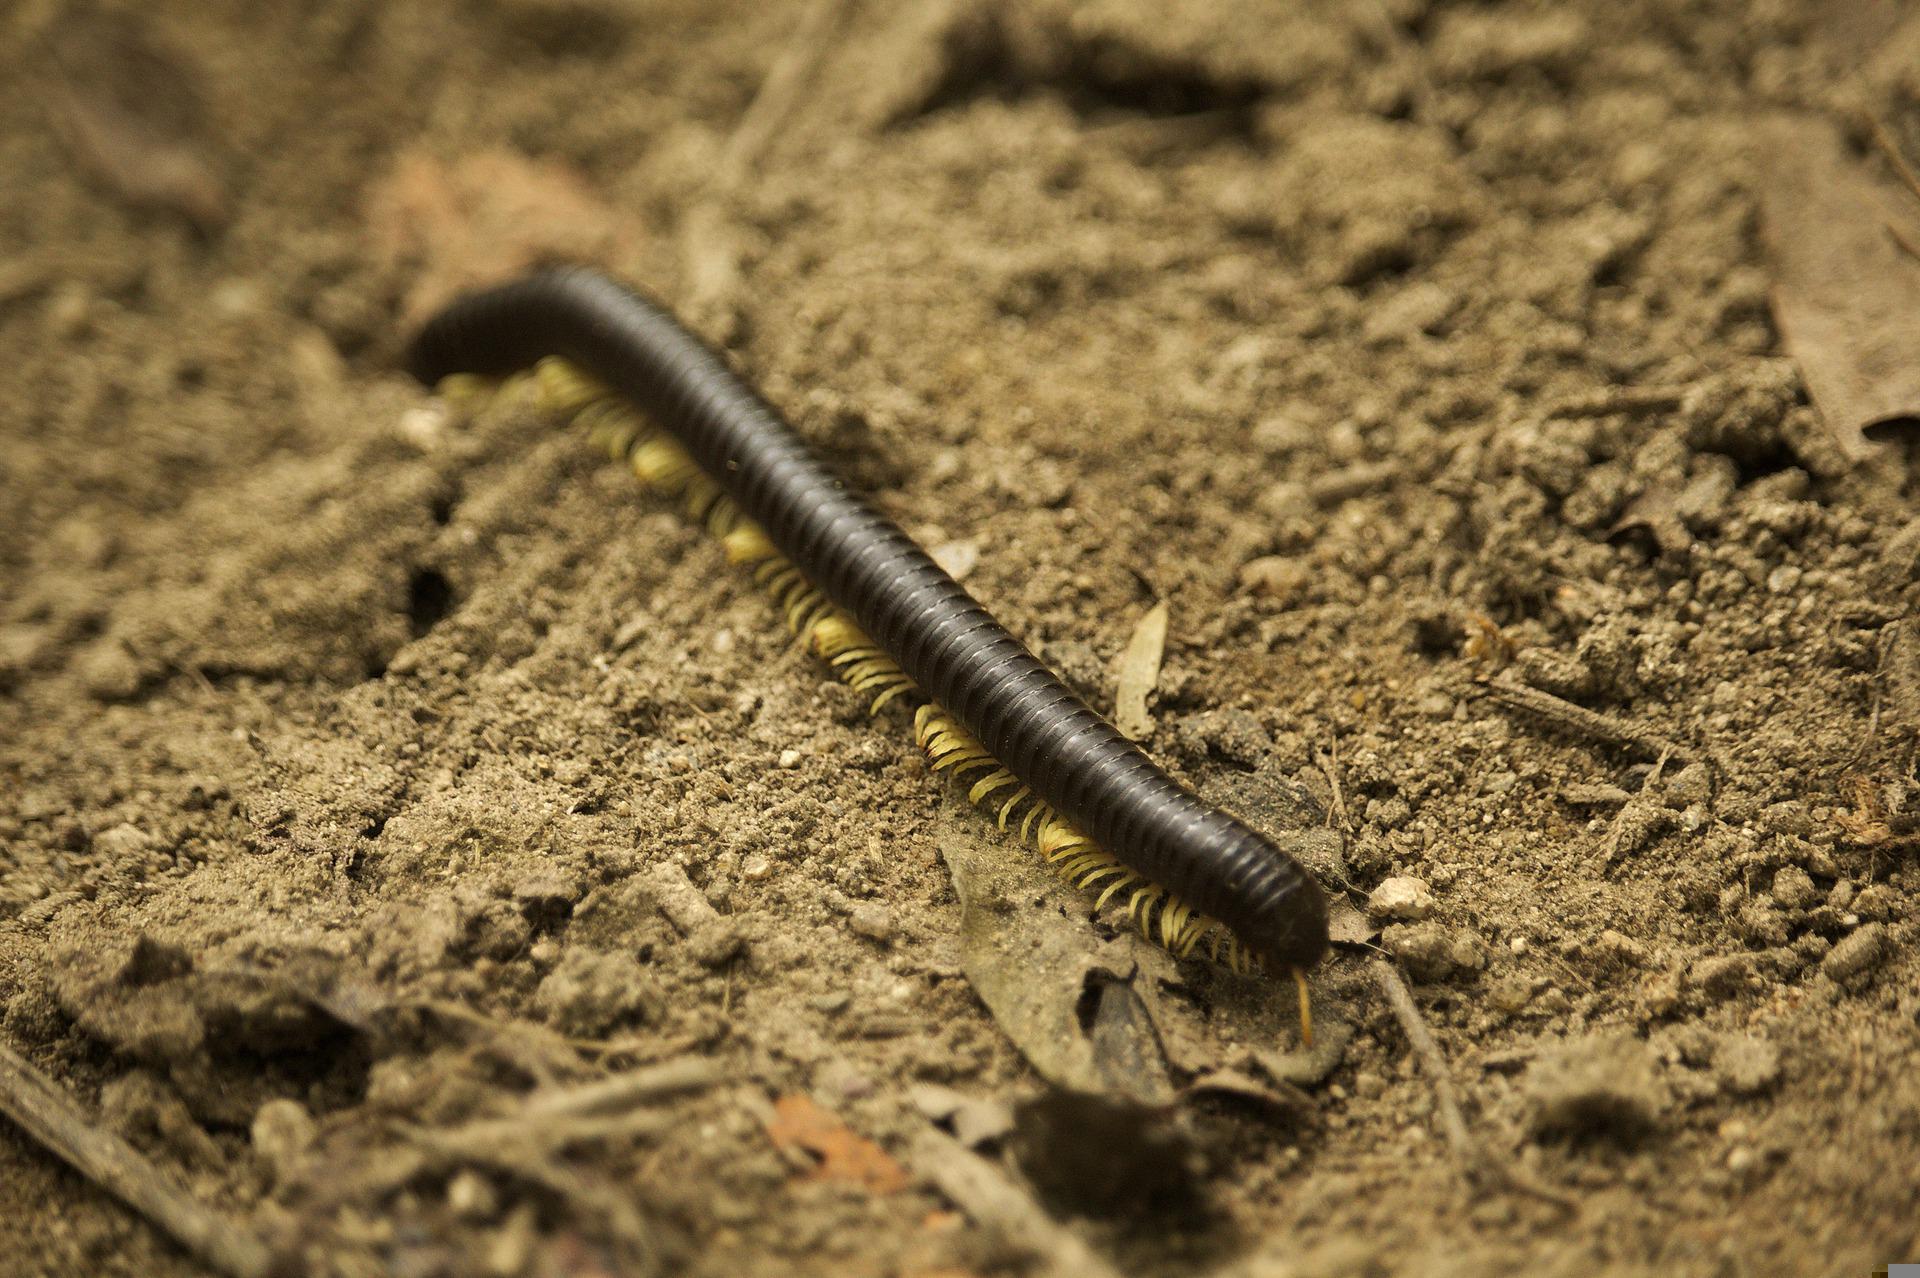 Millipede Removal Services